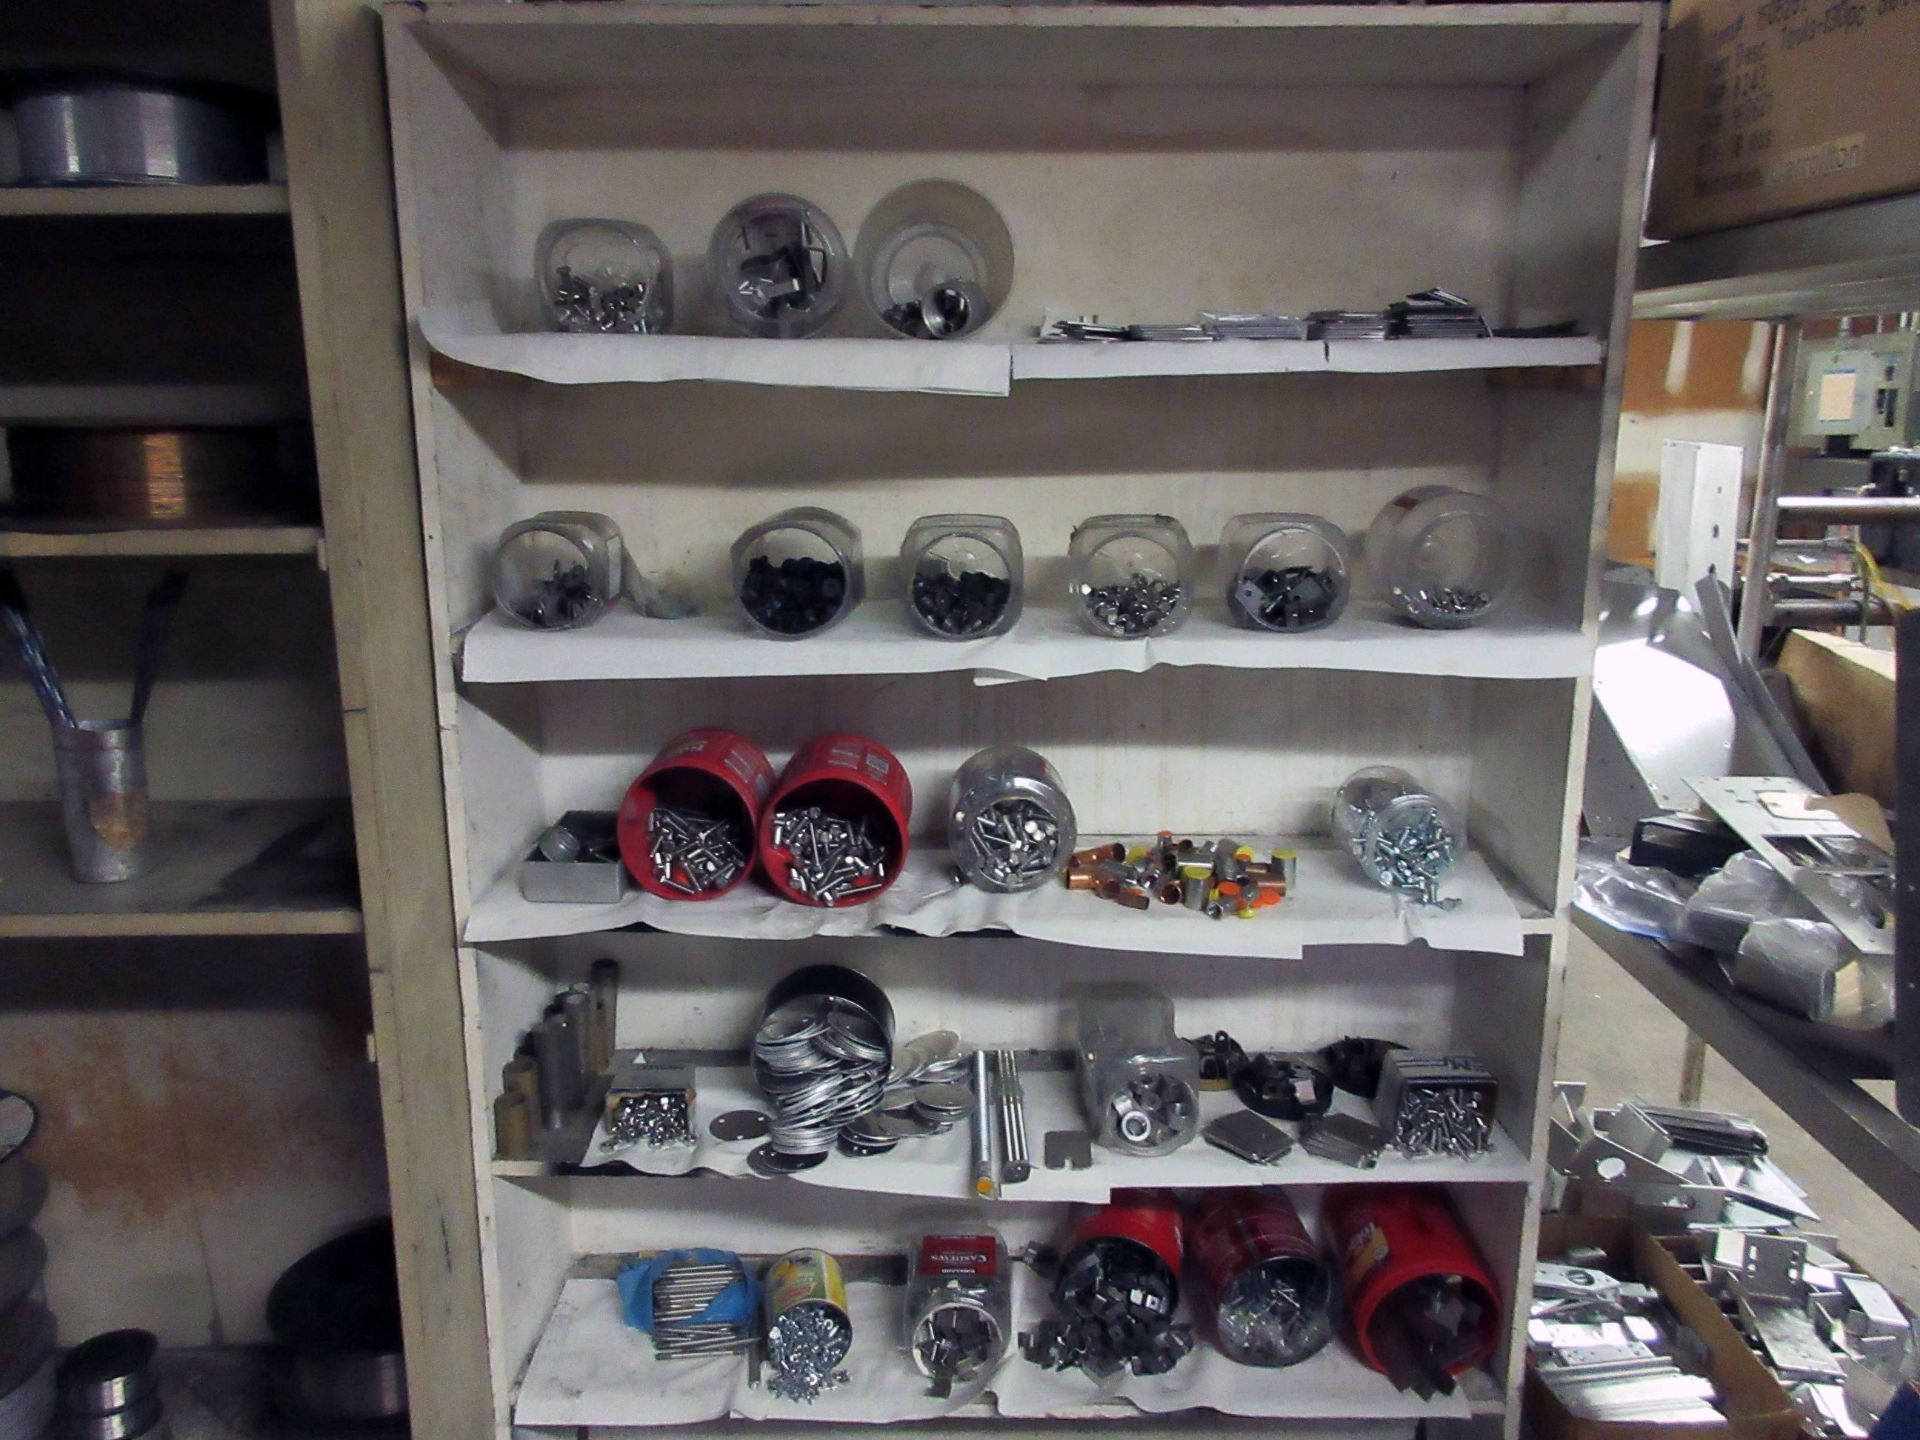 LOT CONSISTING OF: unfinished product - stainless steel, metal aluminum mix, shelves & misc.